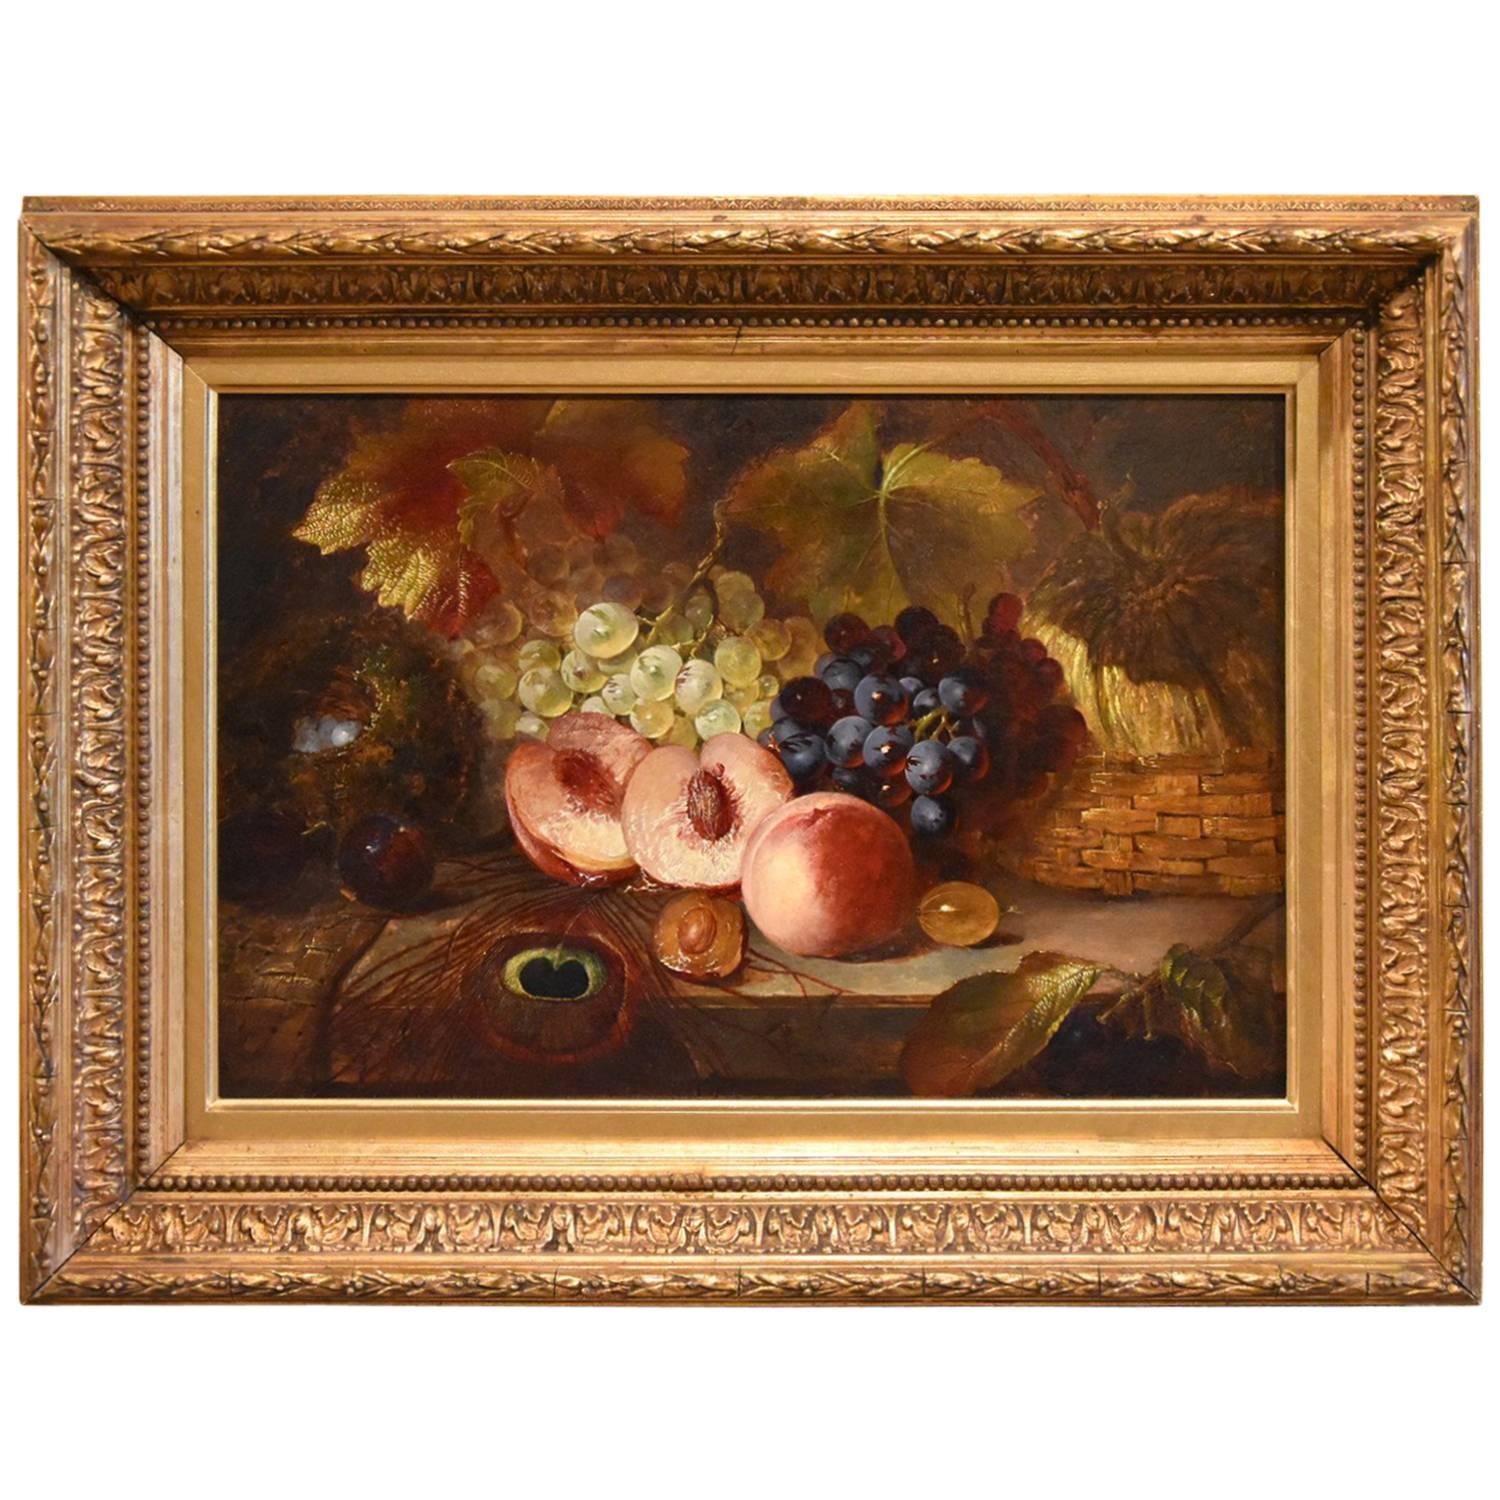 "Dessert Fruit" by James and William Ward For Sale